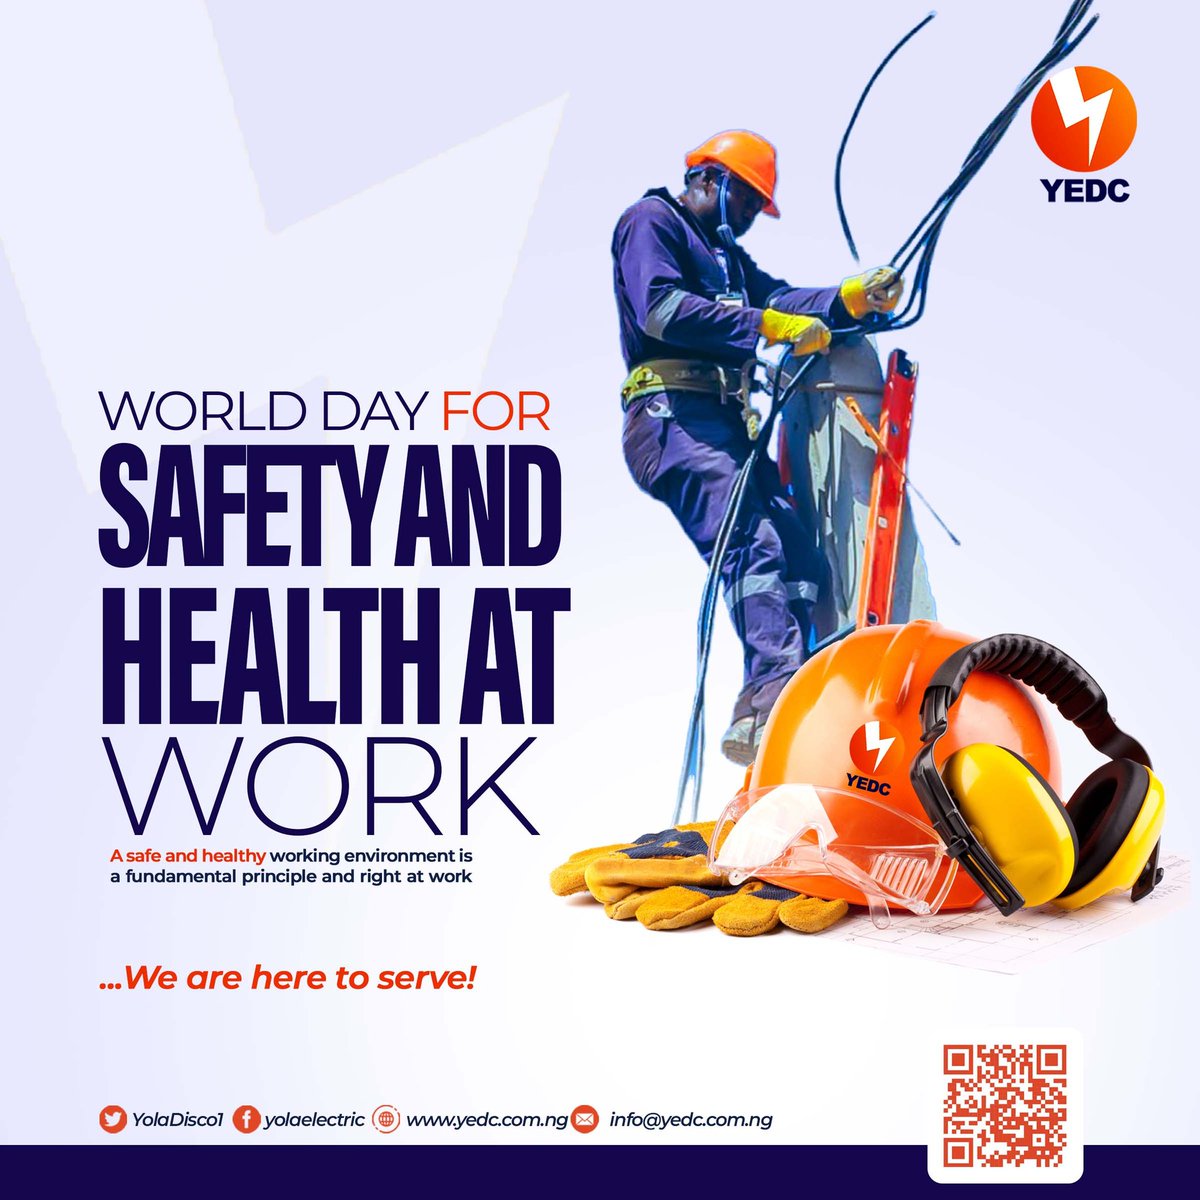 Dear Esteemed Customers,

Let's join hands for a safer and healthier workplace for all.
 #WorldDayforSafetyandHealthatWork  #SafetyFirst